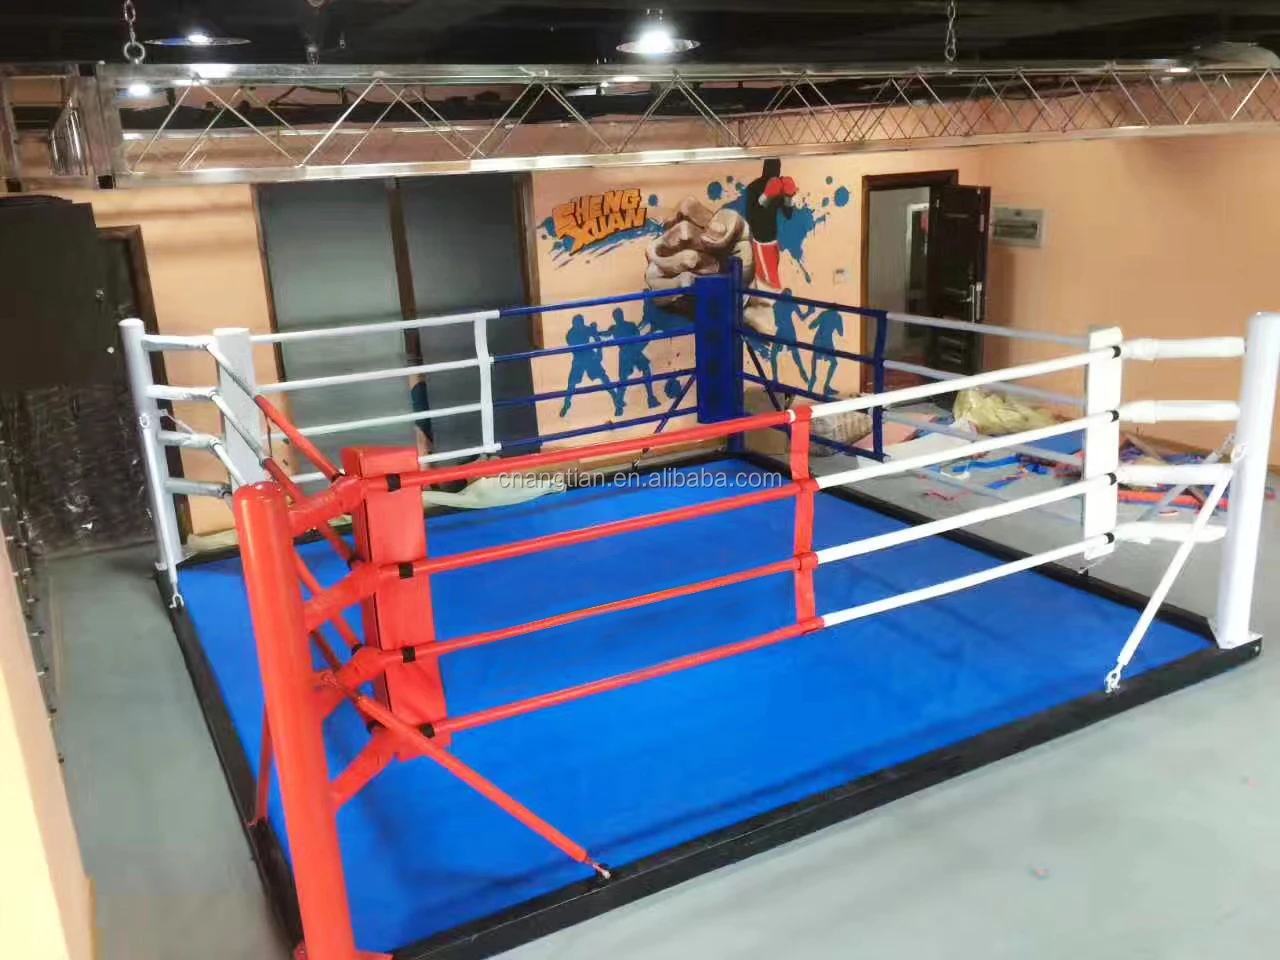 Professional Boxing Ring Commercial wrestling ring| Alibaba.com